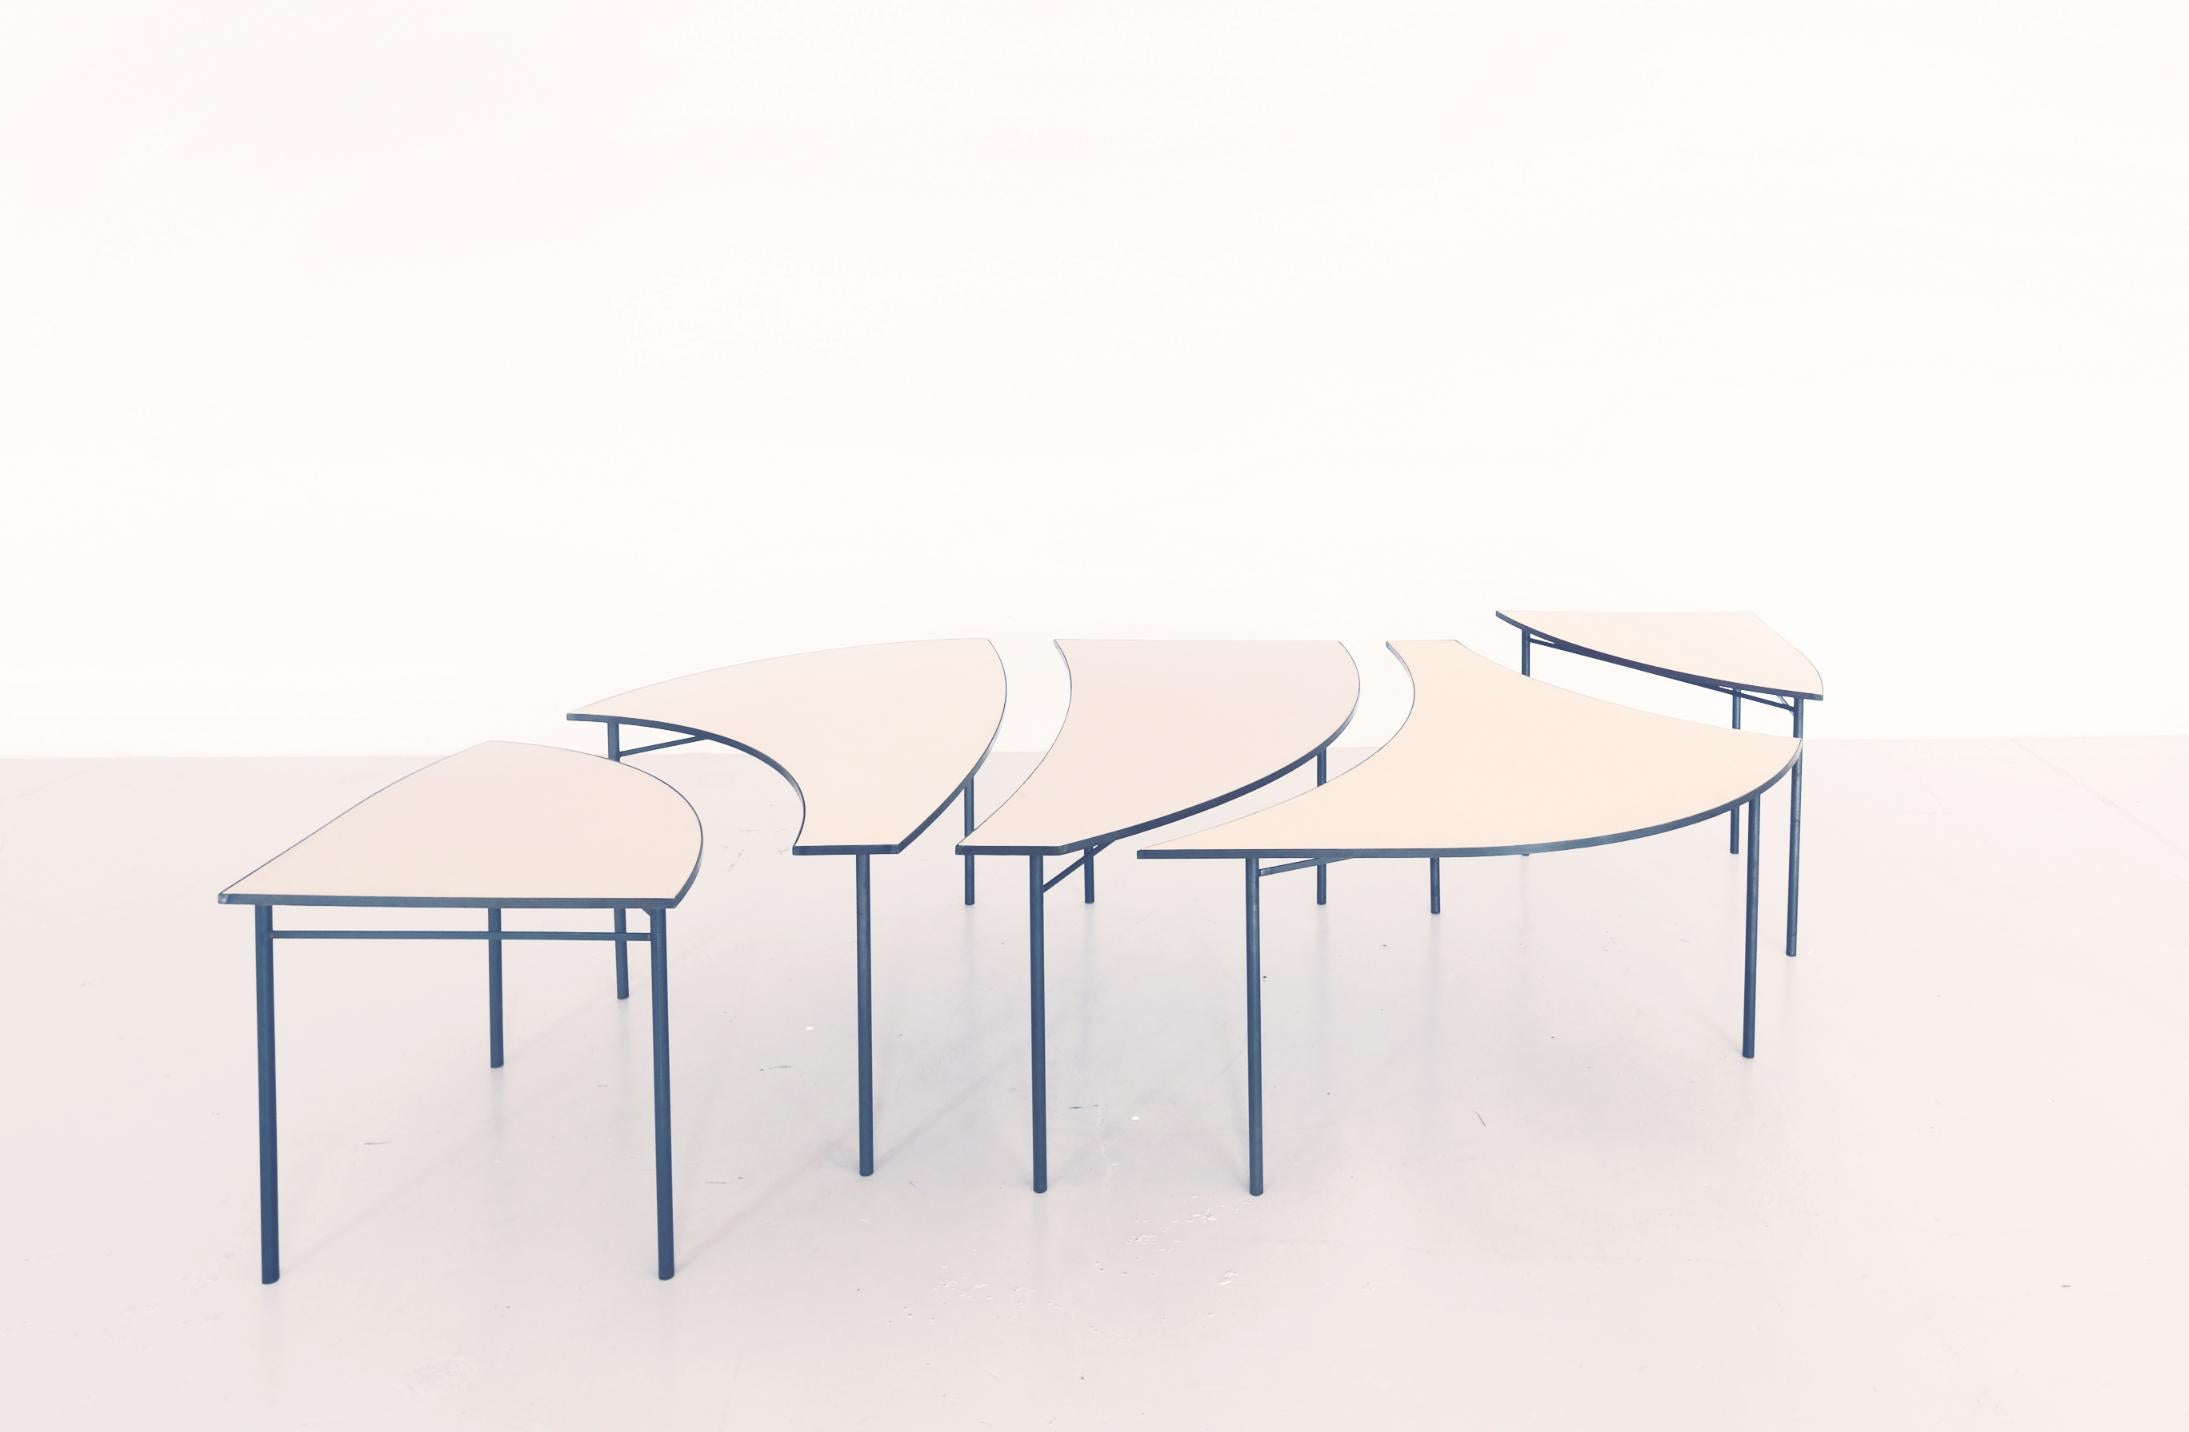 Blue Tabula [non] Rasa table set by Studio Traccia
Dimensions: W 280 x D 140 x H 74 cm
Materials: Steel.
Also Available: Other colours available.

The table was designed for our installation called tabula[non]rasa developed for Milan Design